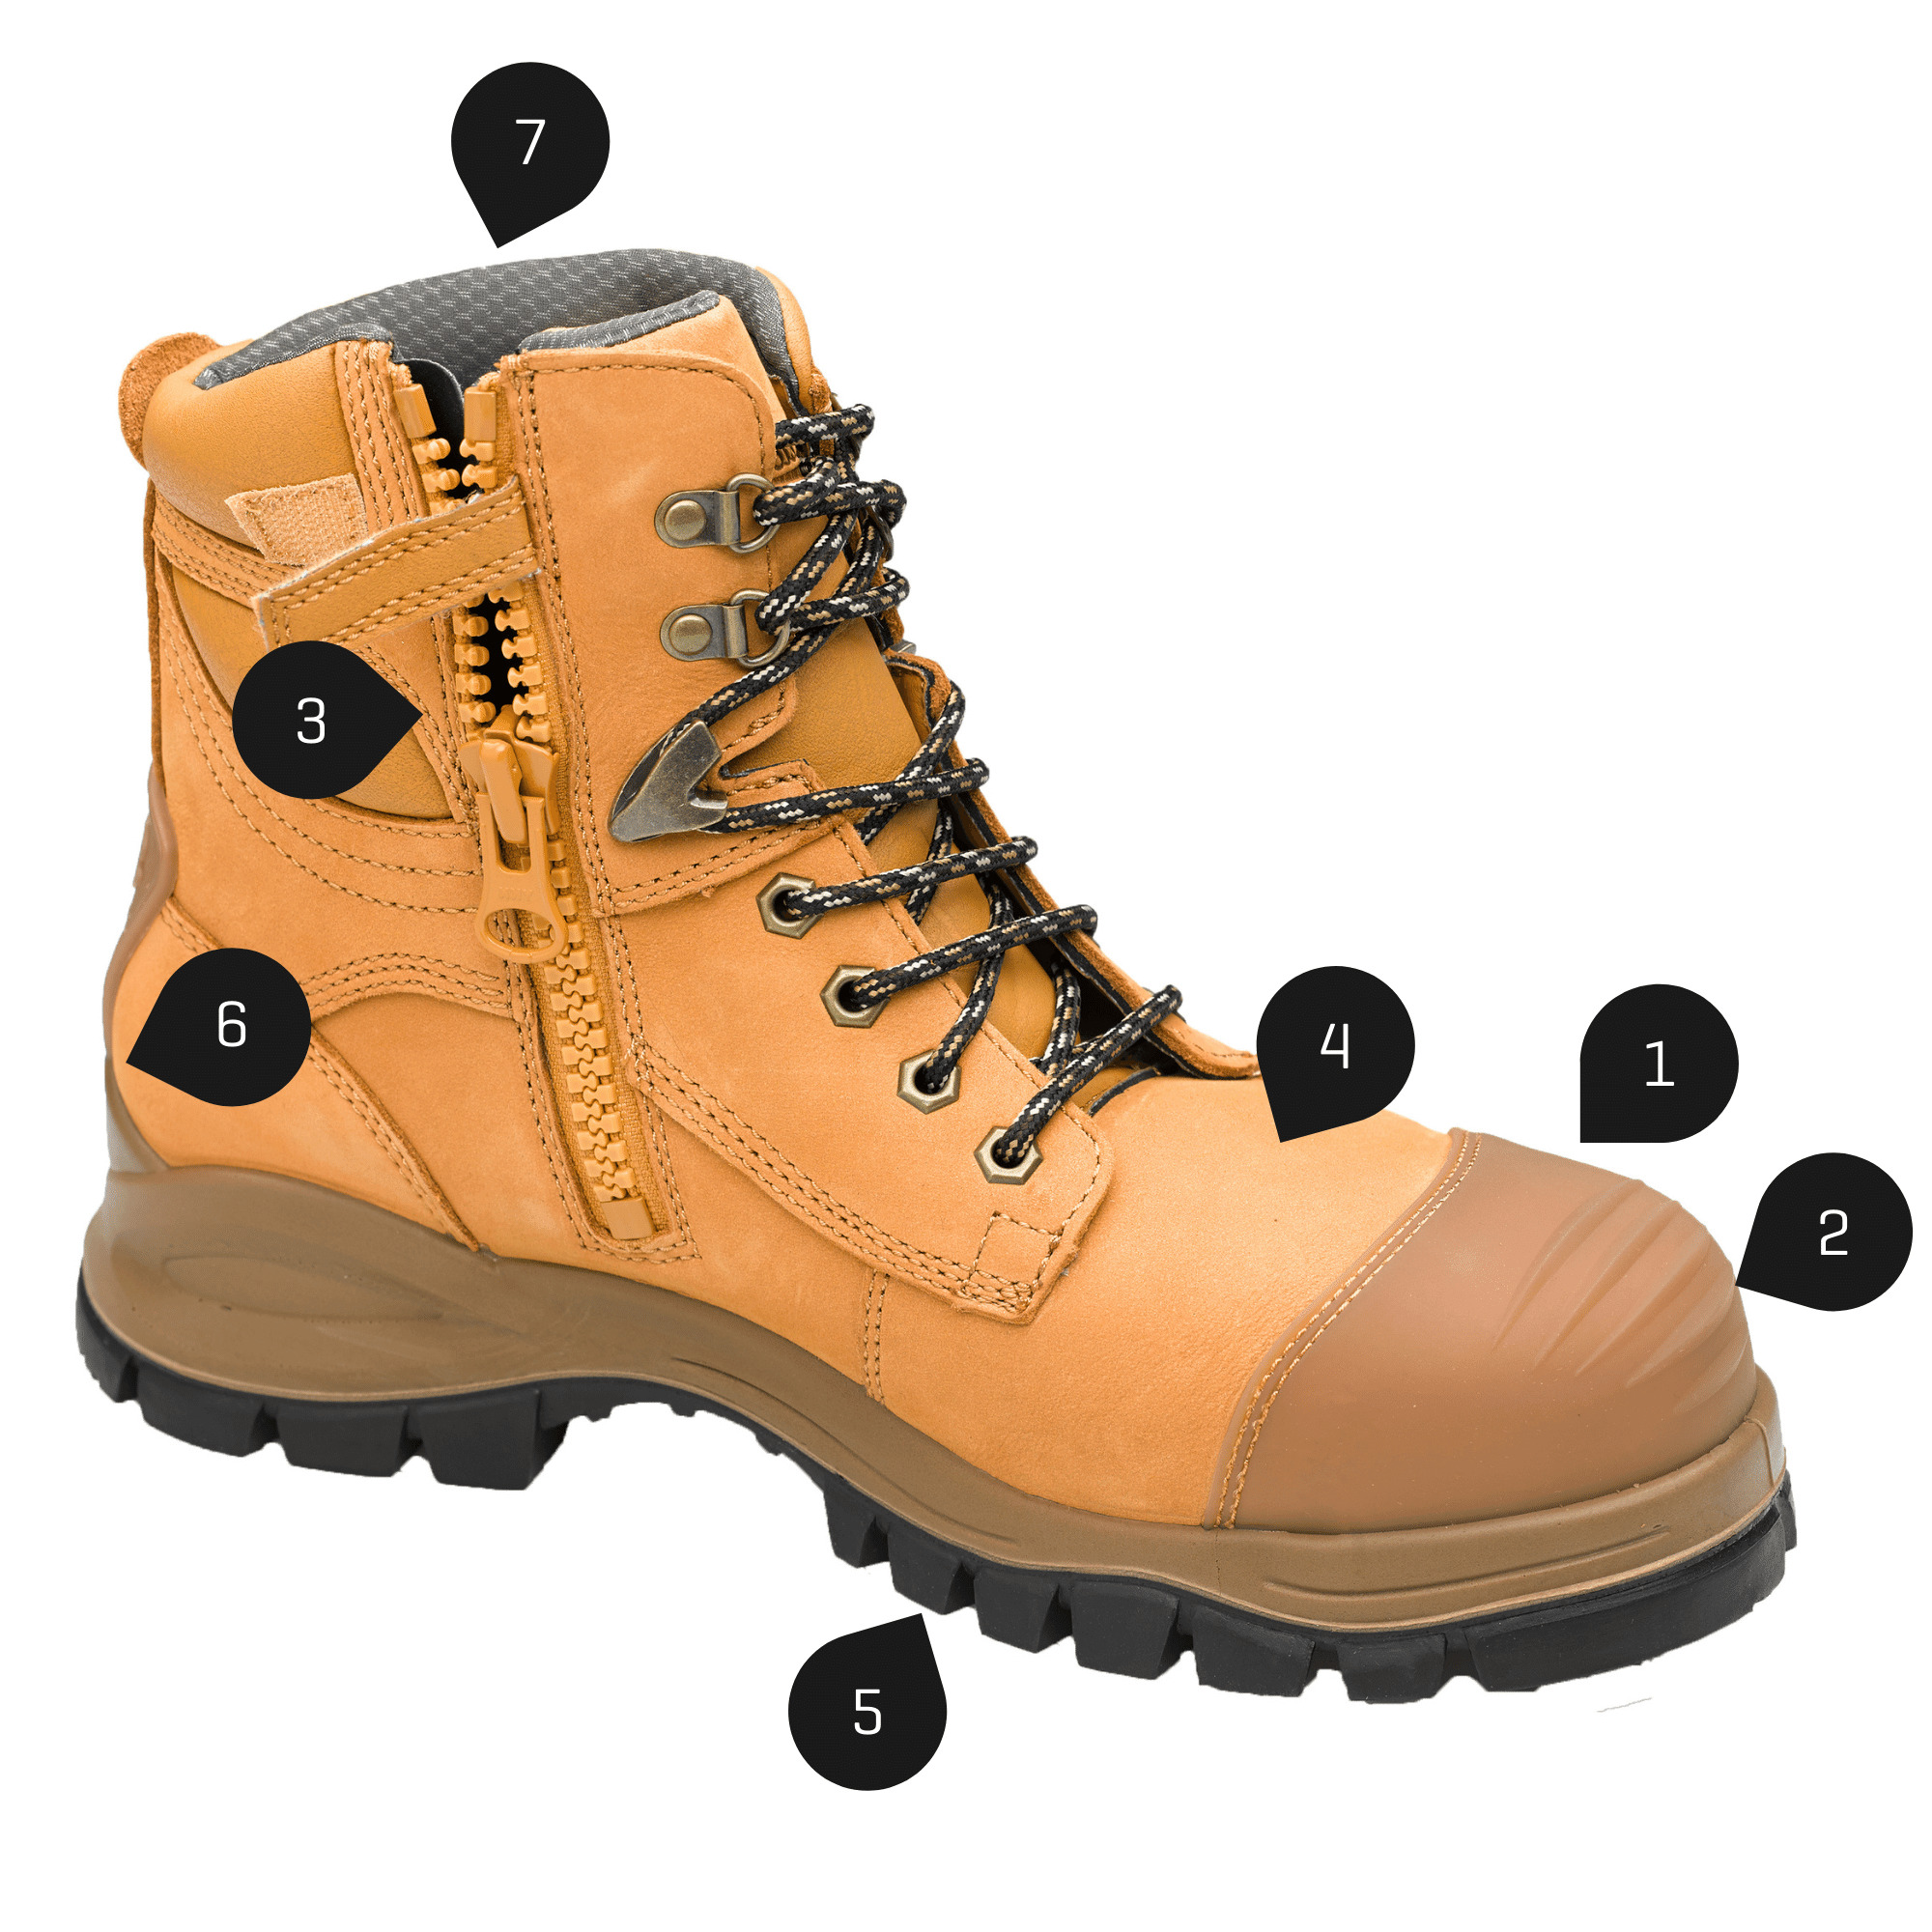 What to look for in a safety boot